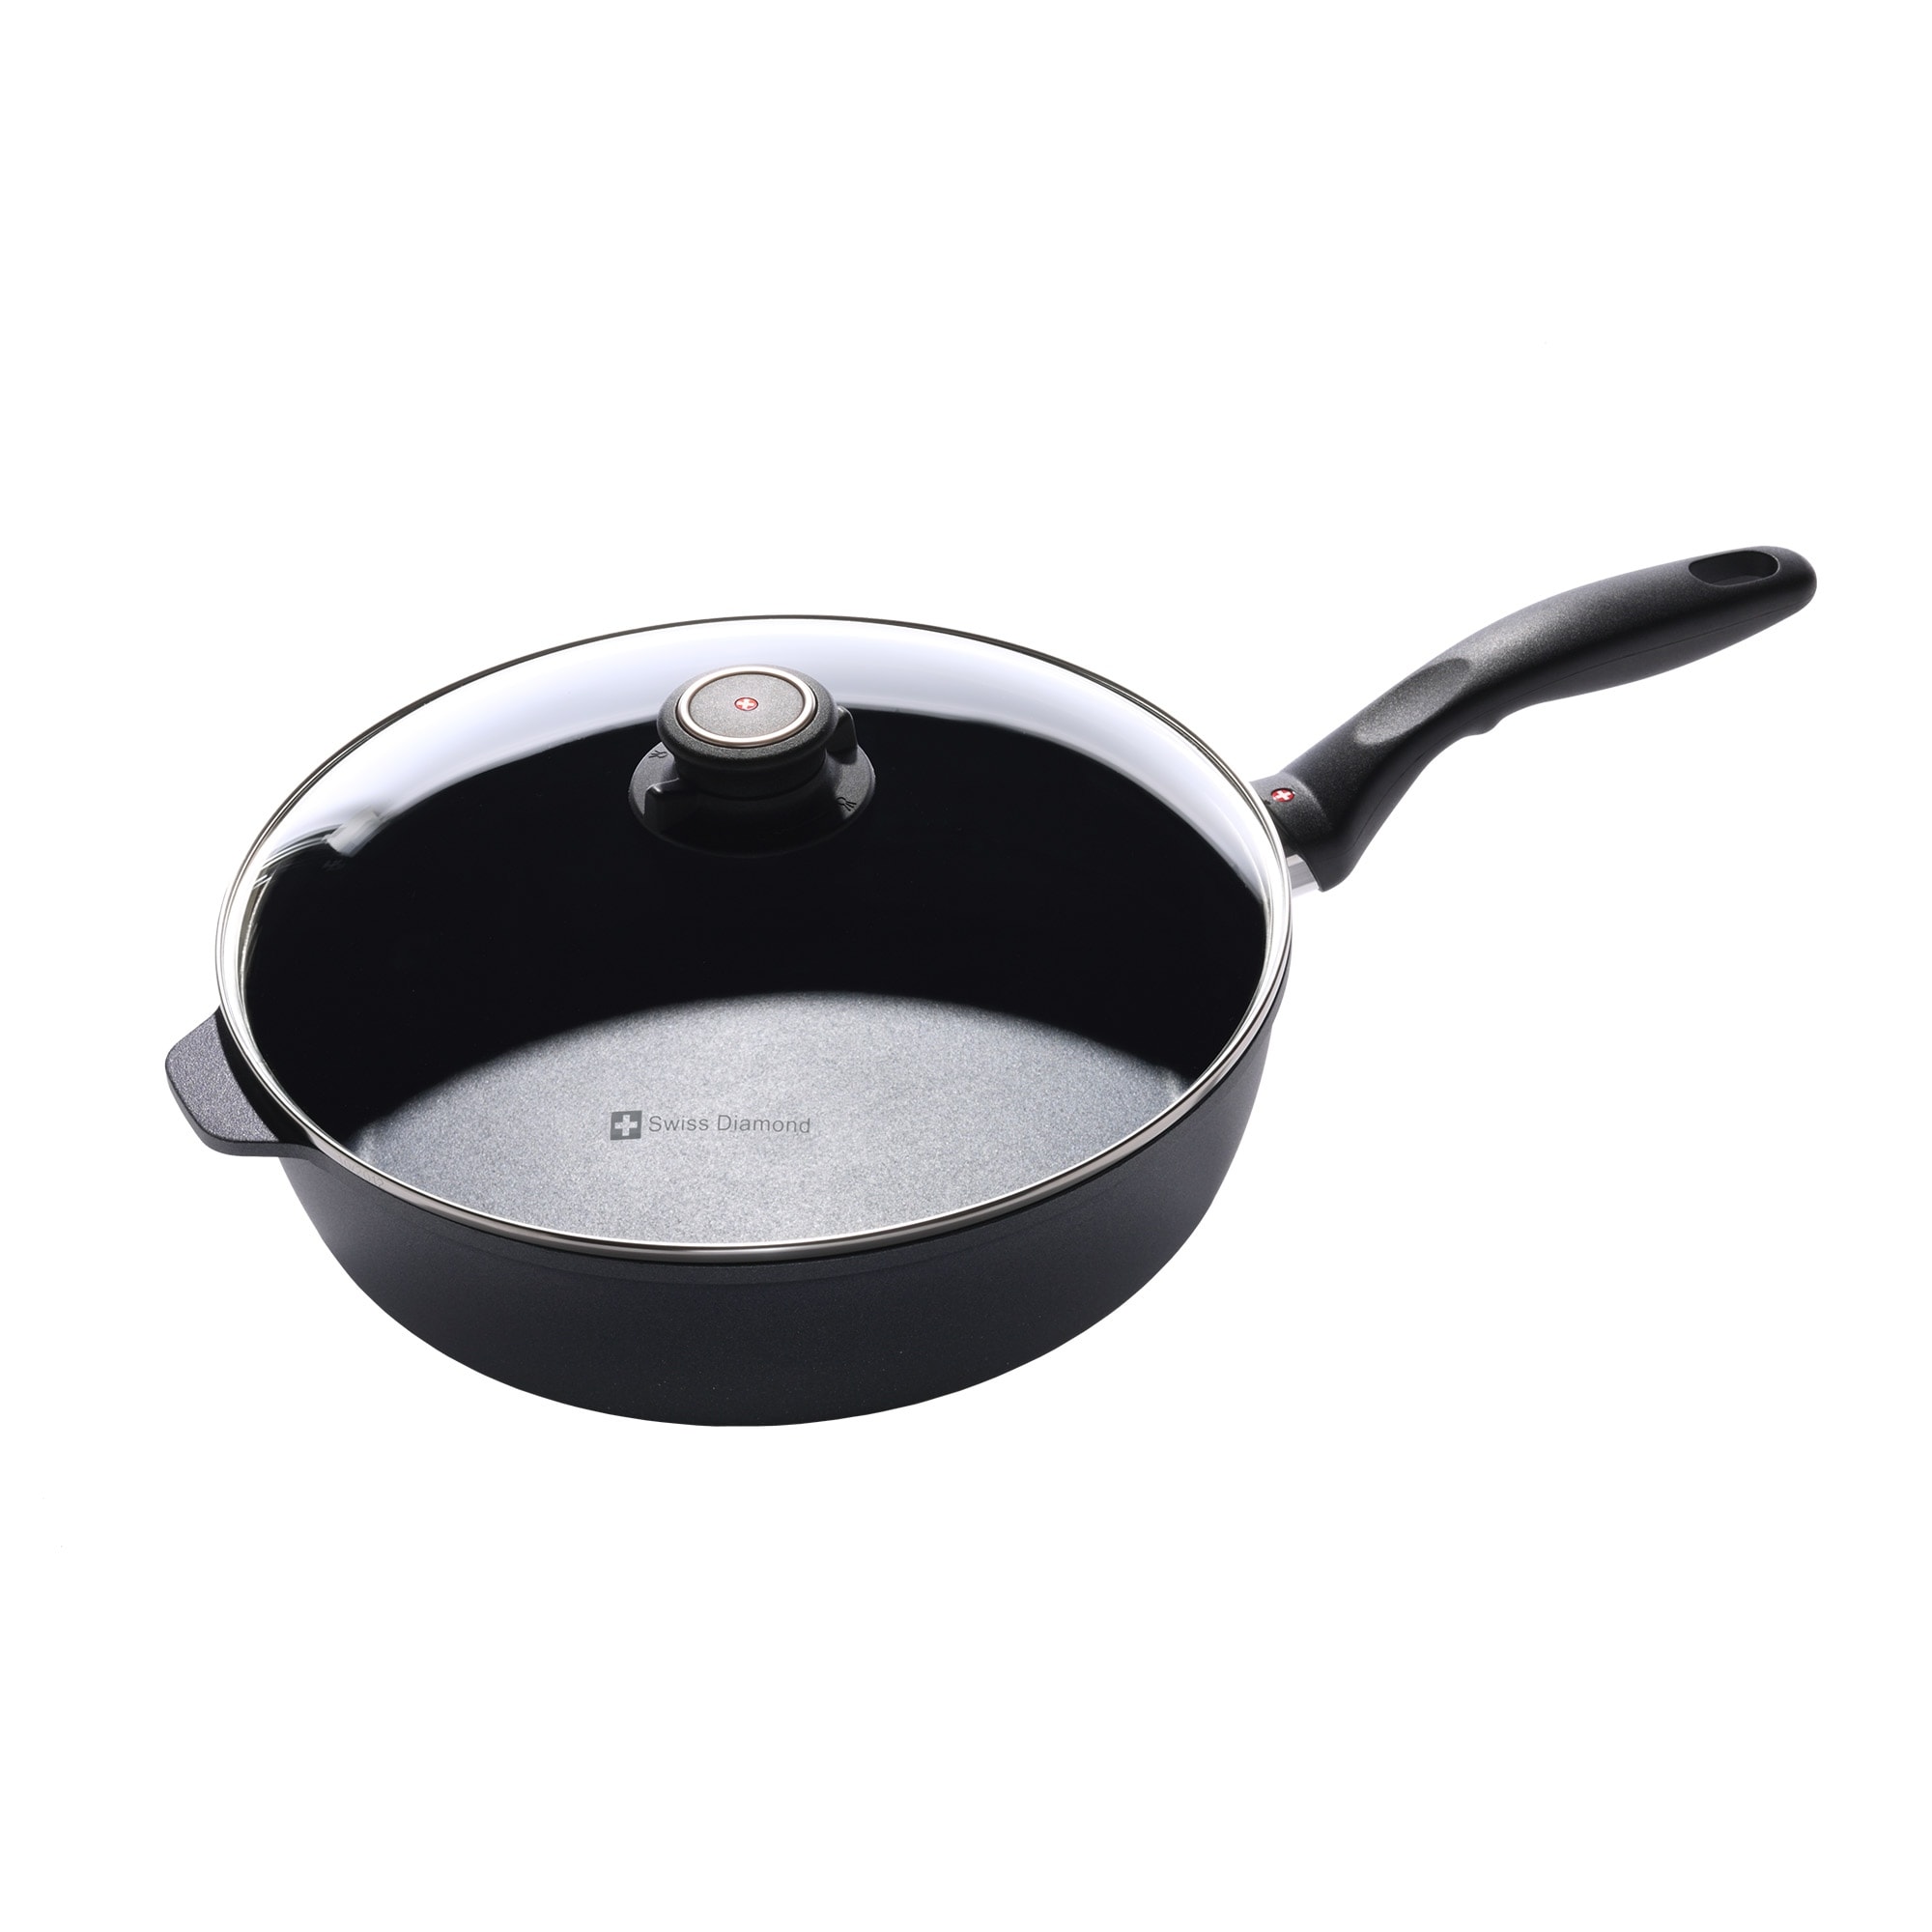 stainless steel deep skillet / saute pan CHEF 28 cm induction